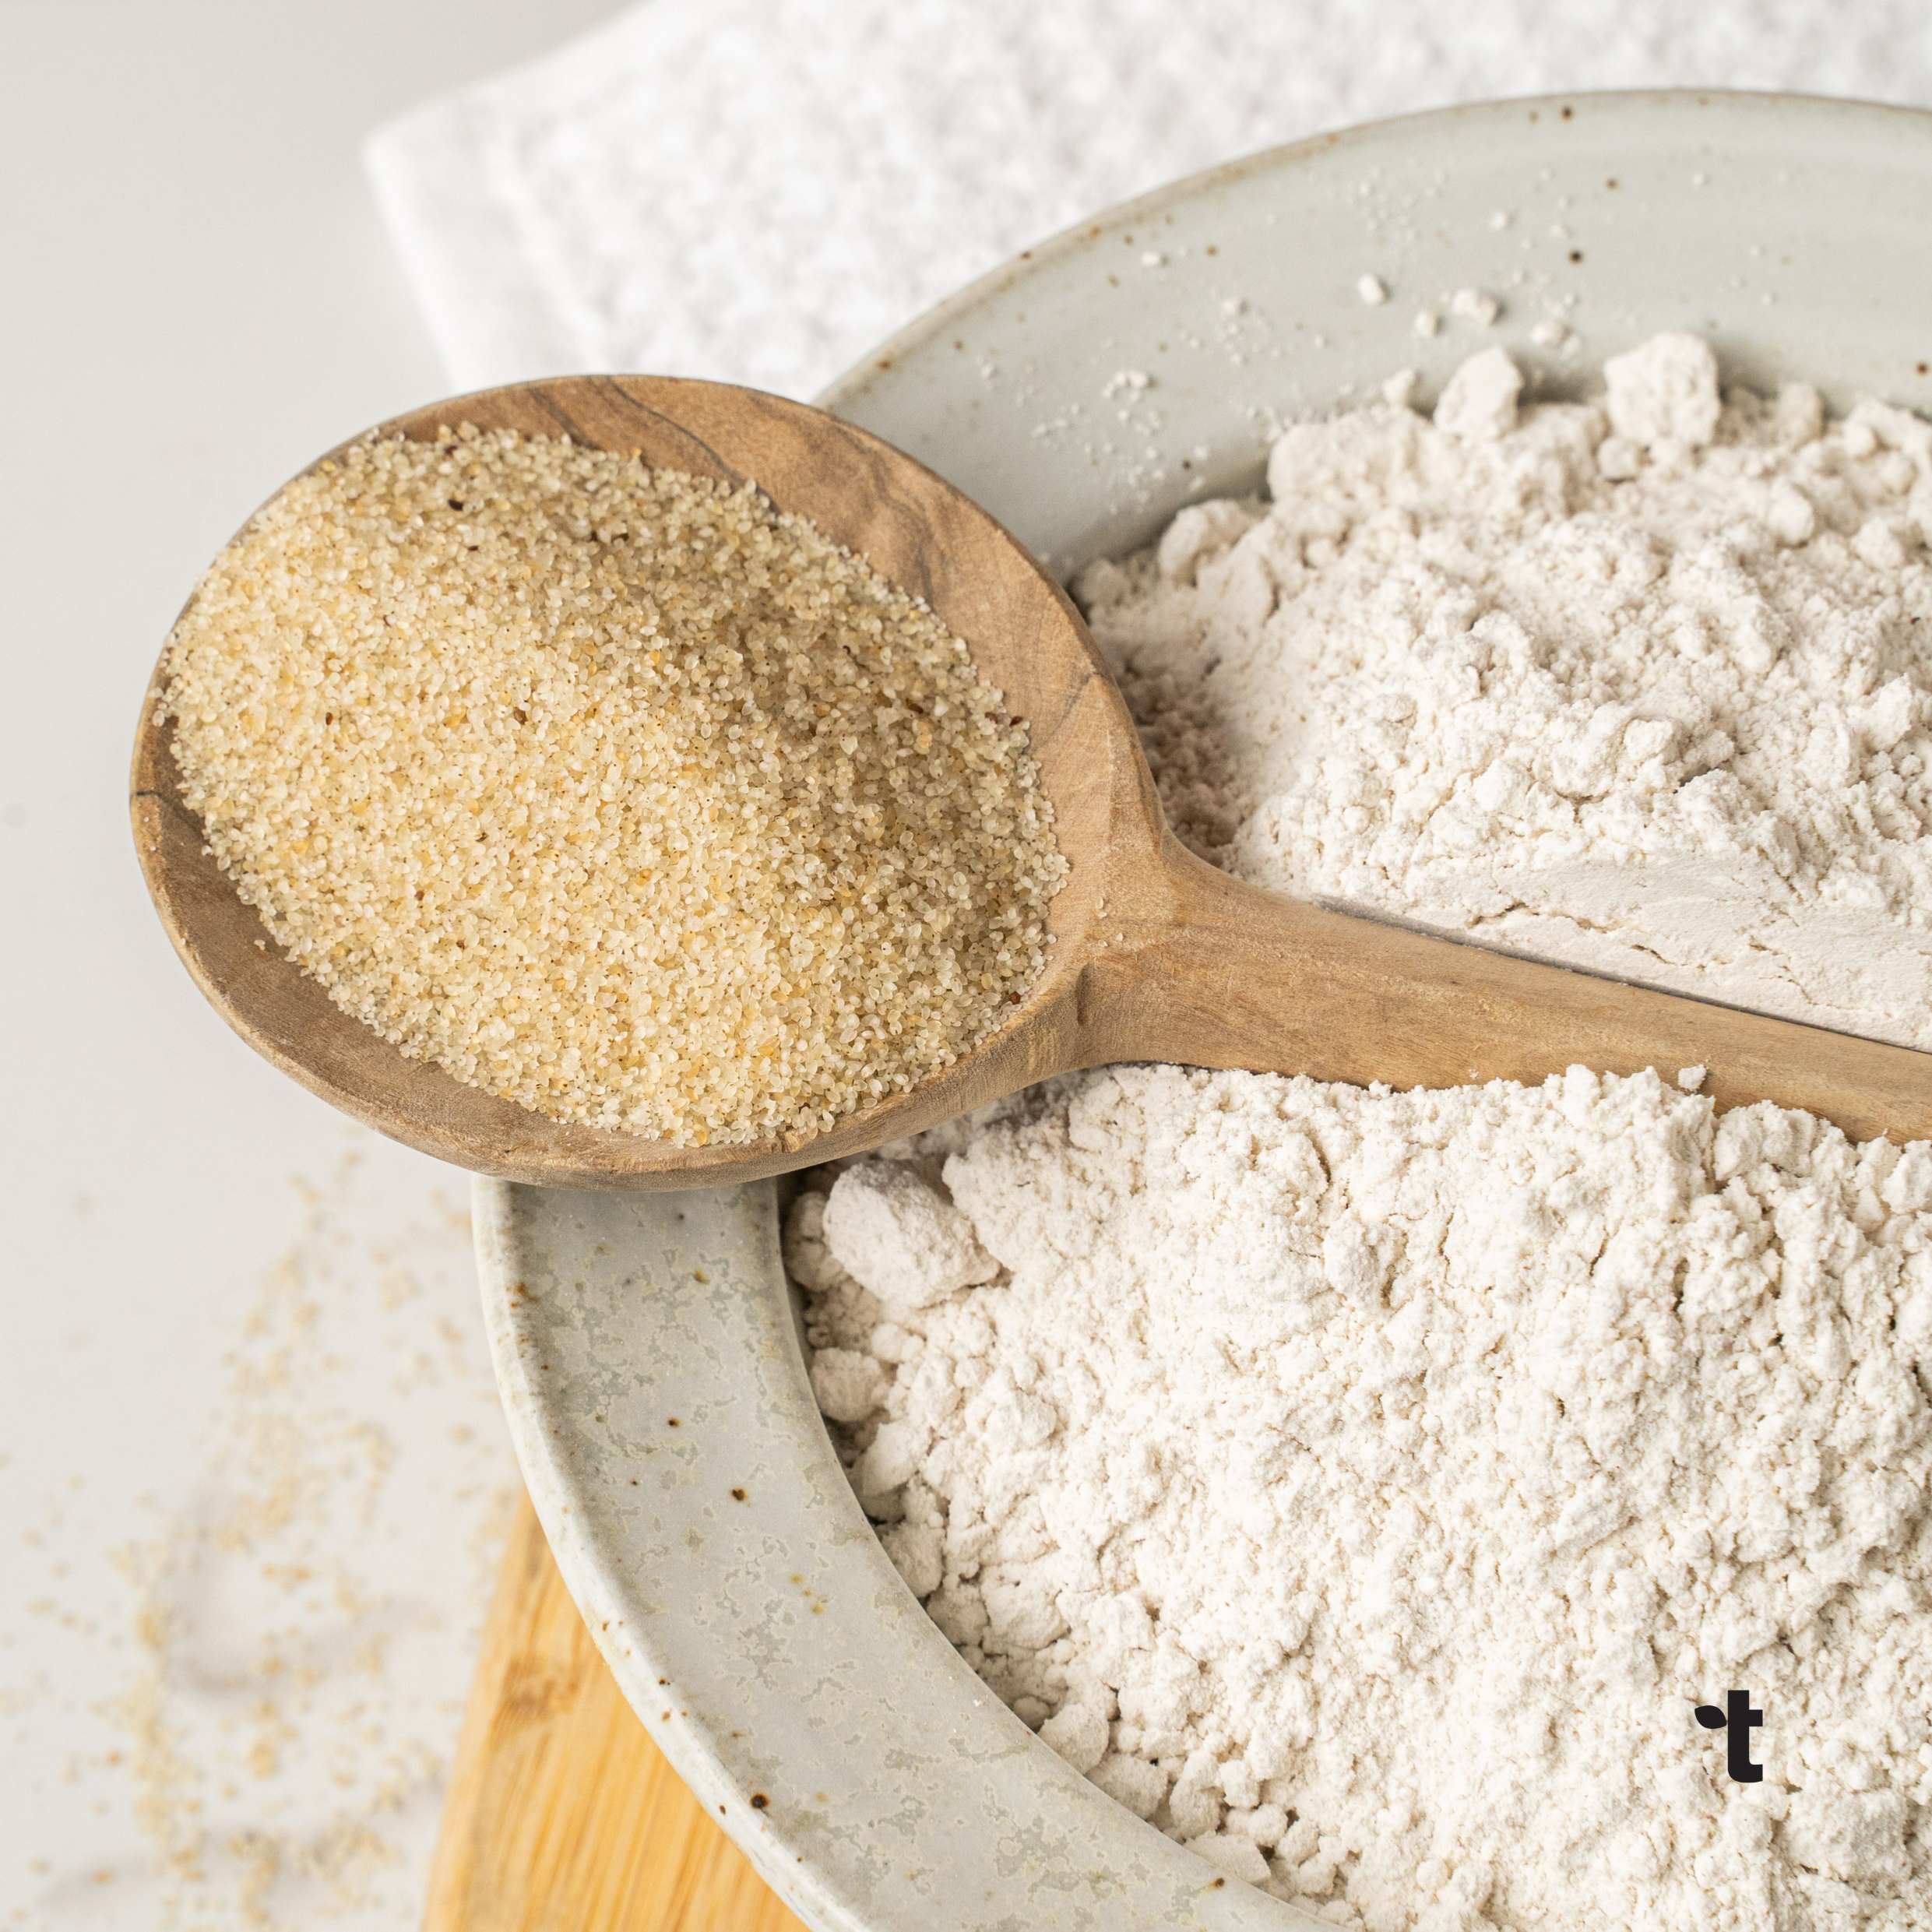 Fonio grain is displayed in a wooded spoon, resting on top of a bowl of fonio flour.